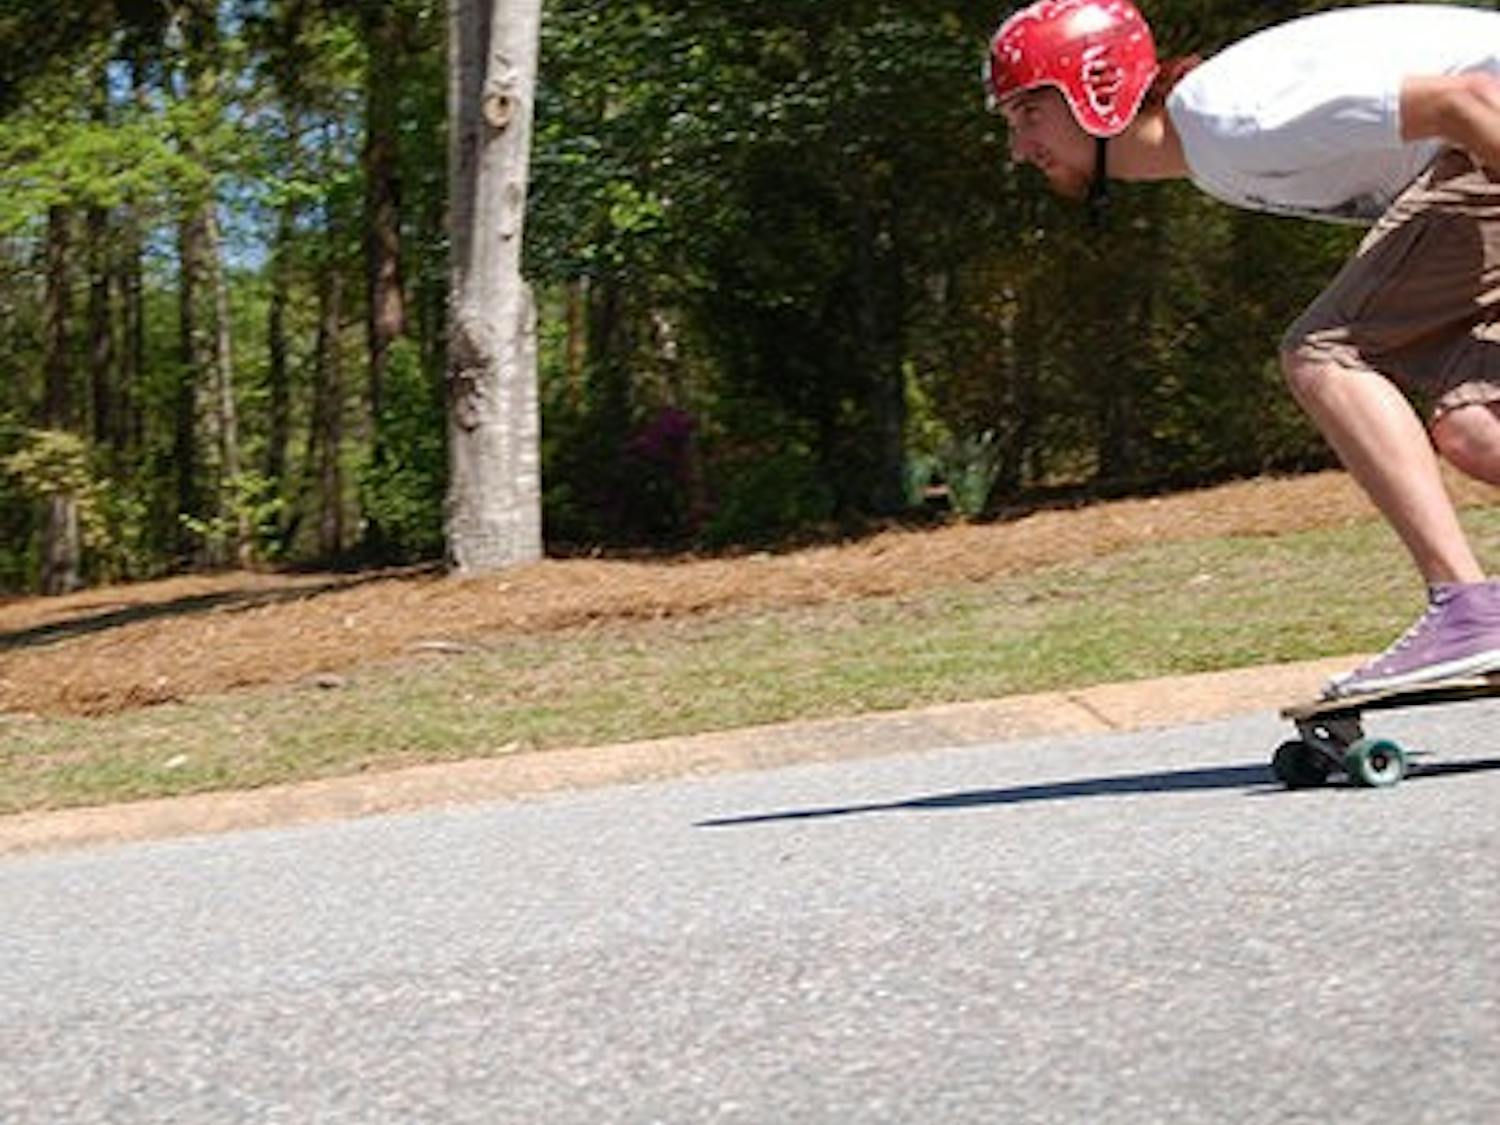 Richie Kesseli uses proper stance to achieve speeds up to 50 miles per hour.